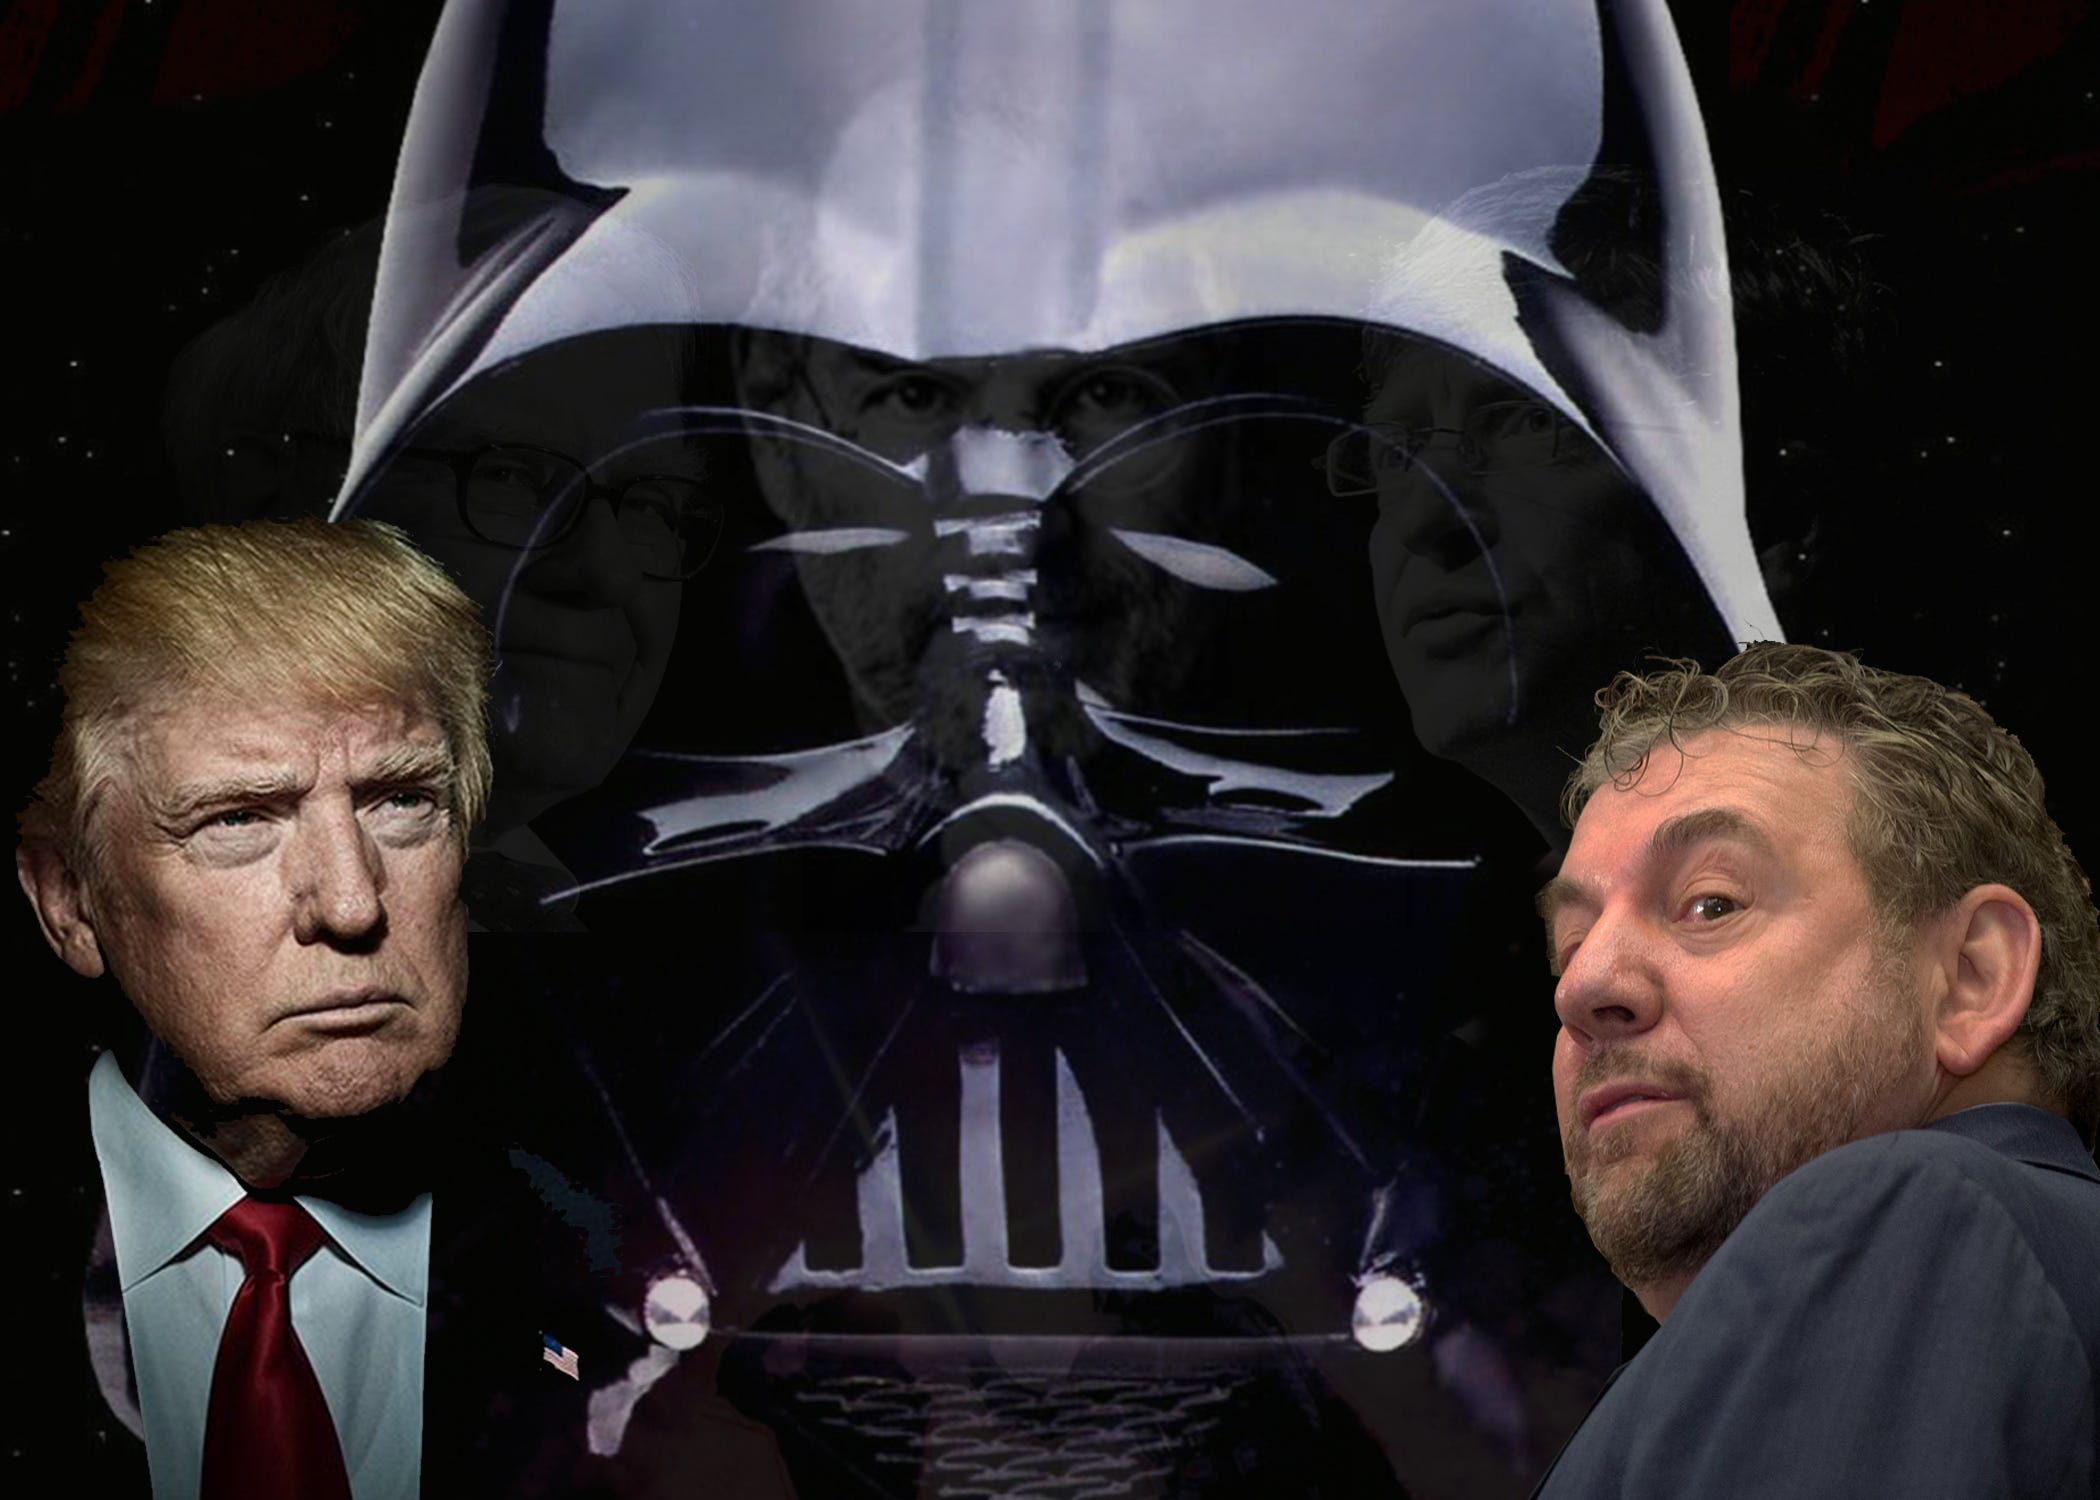 James Dolan, Donald Trump and the Power of the Dark Side